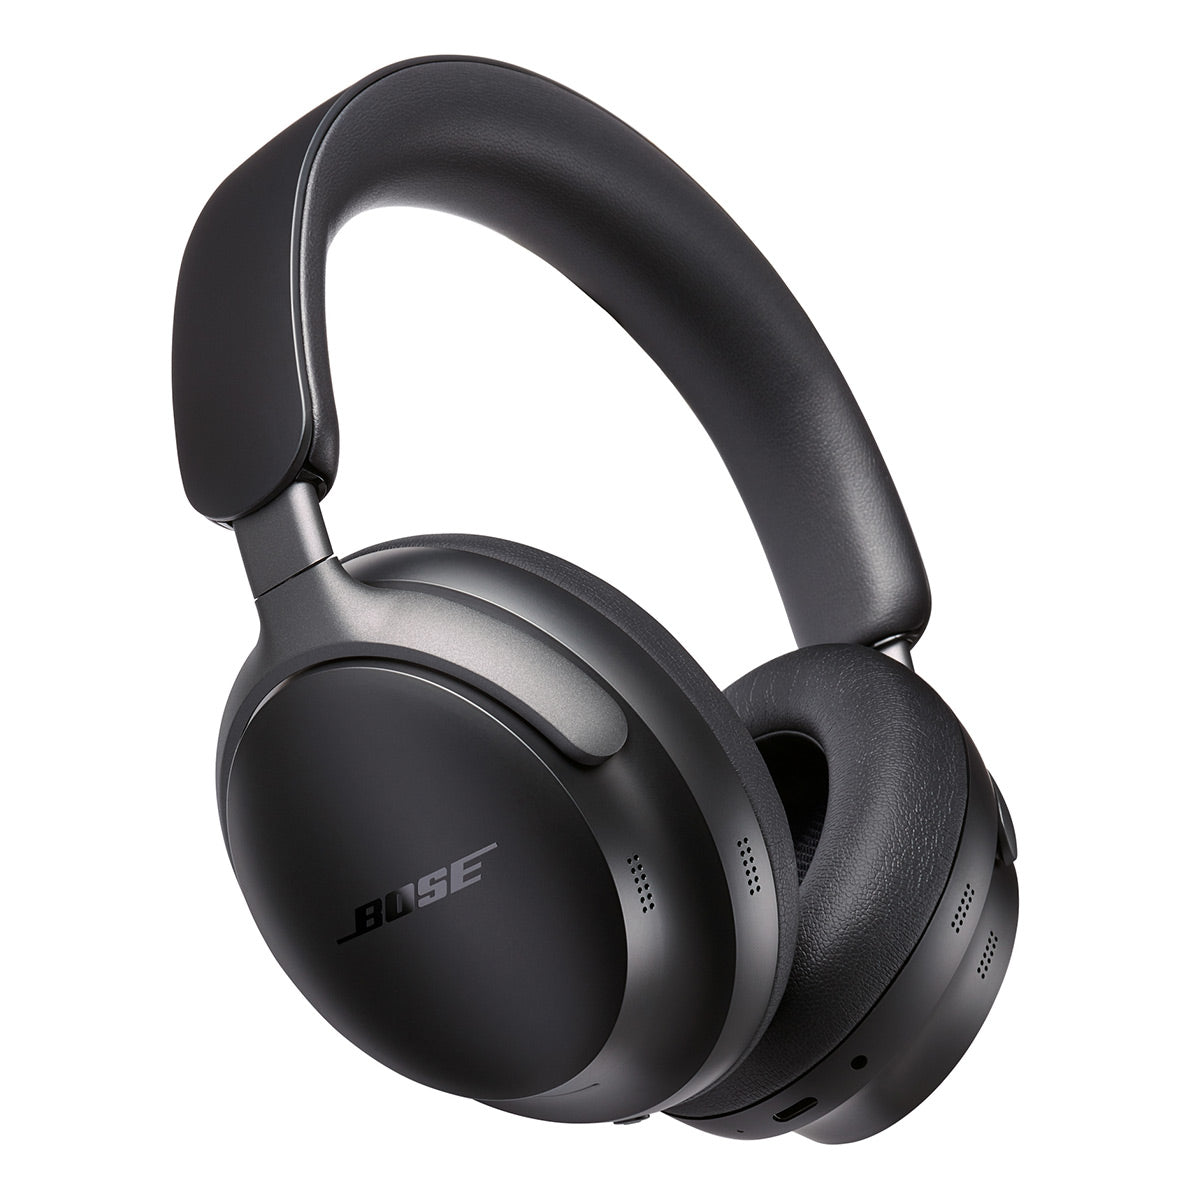 Bose QuietComfort Ultra Review - The Best Noise-Cancelling Earbuds